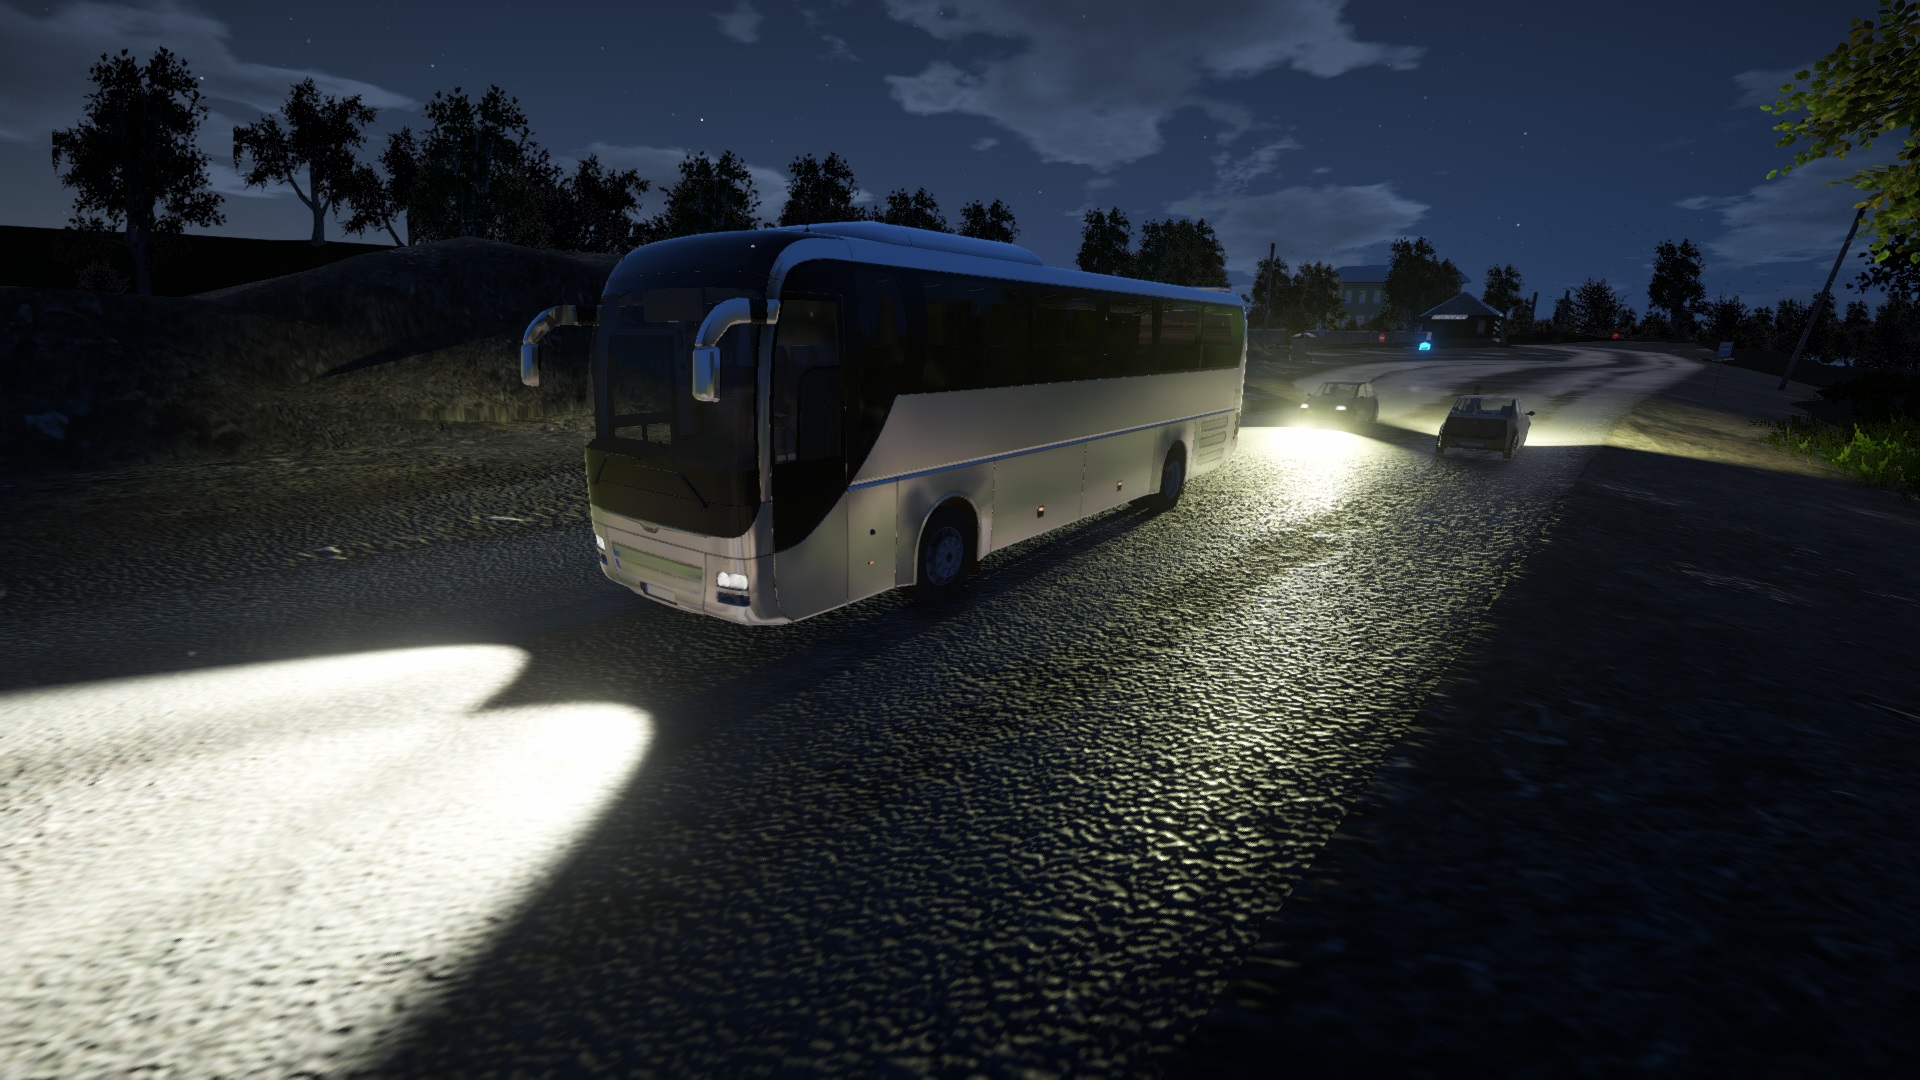 Bus Driver Simulator 2023 instal the new version for ios